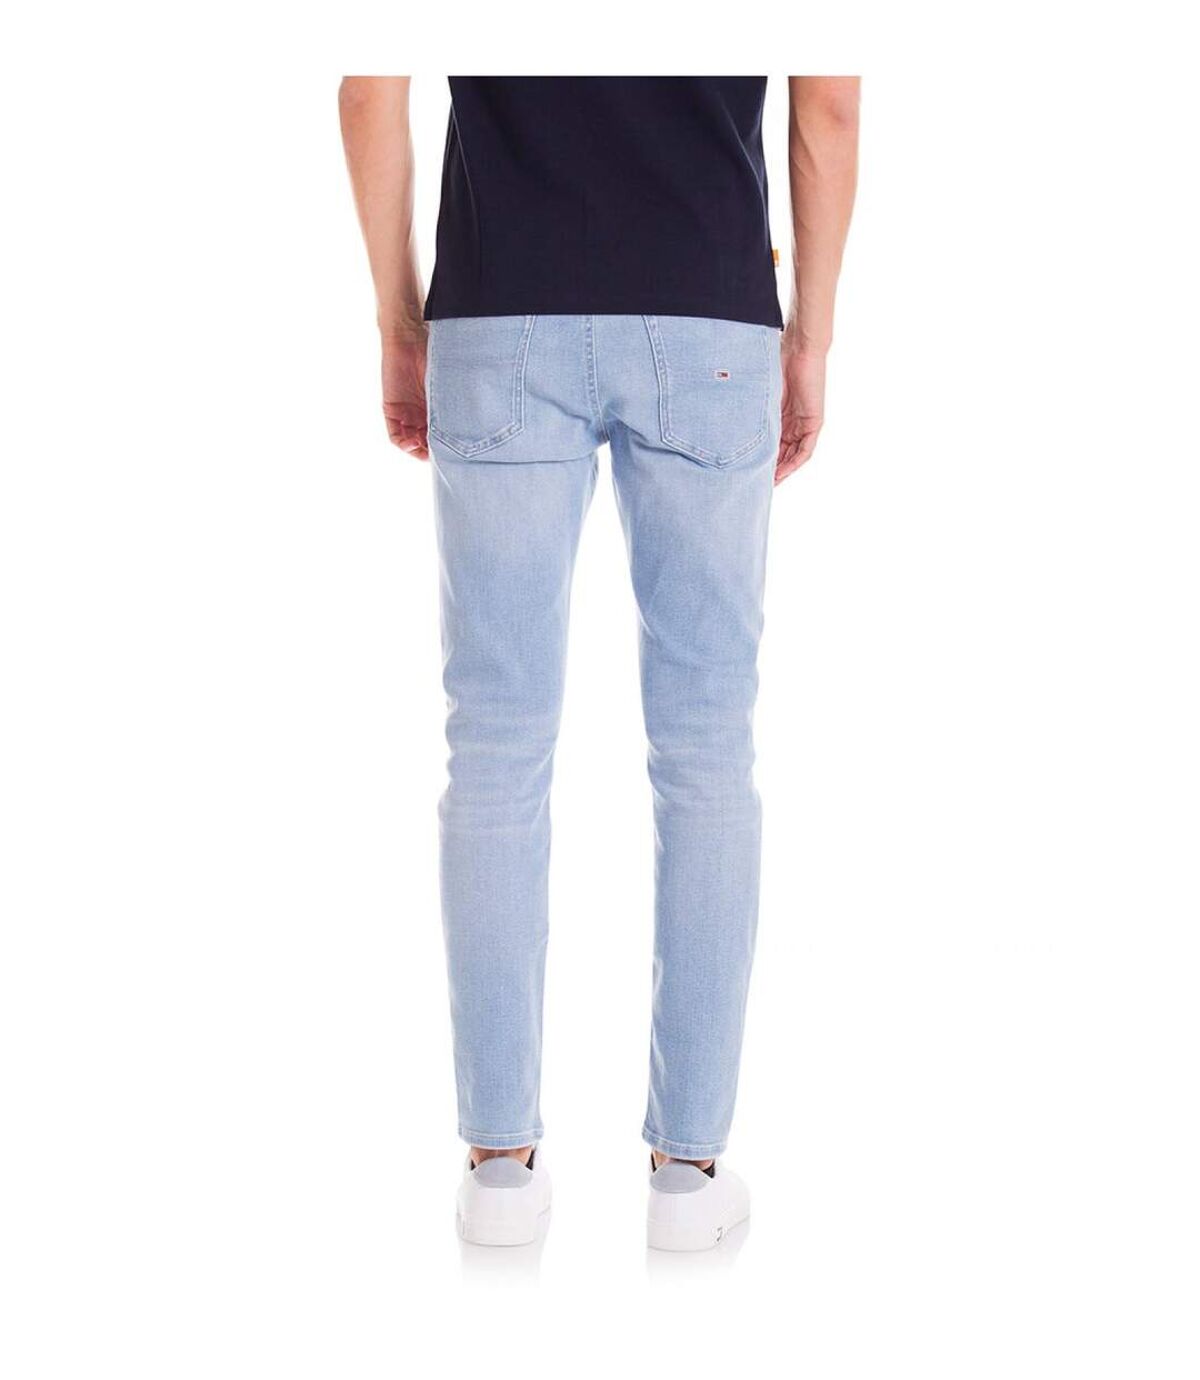 Jean denim clair  -  Tommy Jeans - Homme